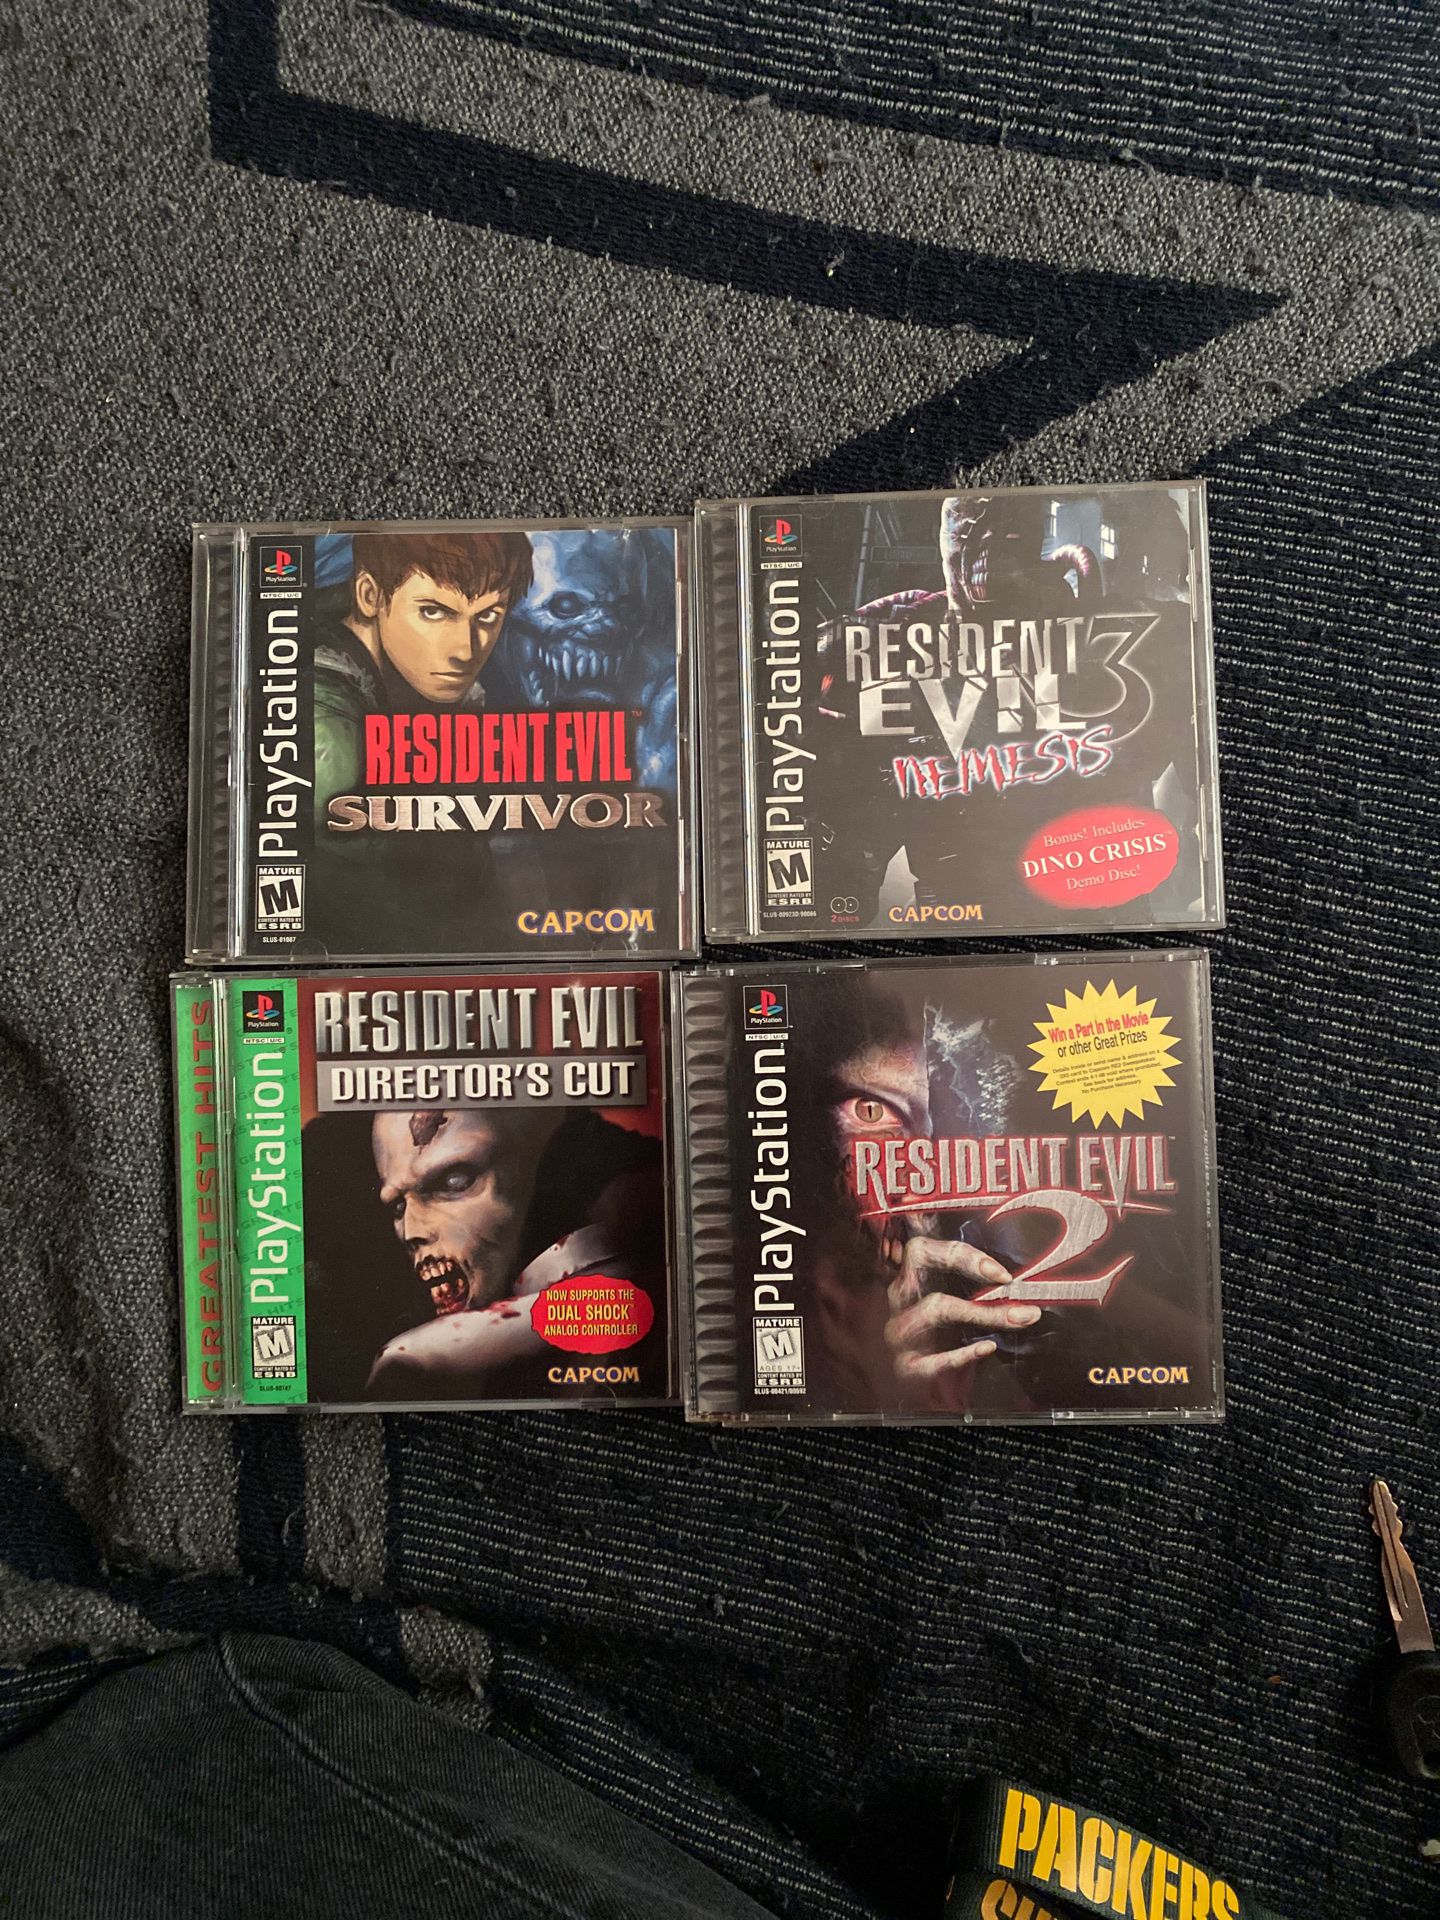 Resident evil Ps1 collection